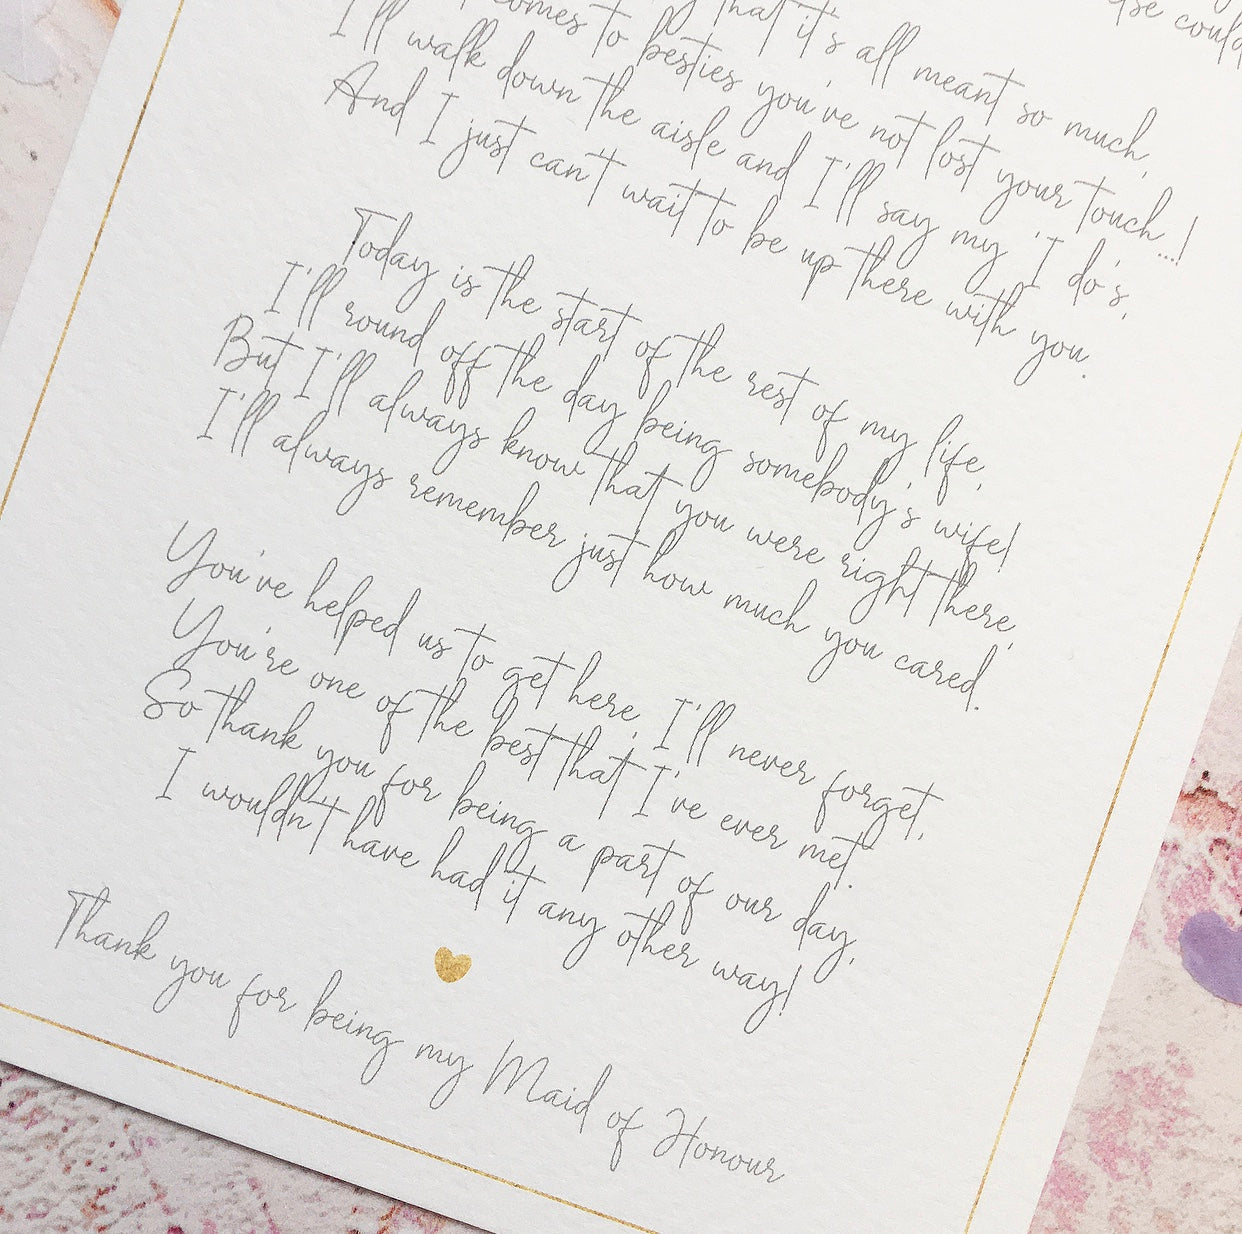 'Thank you for being my Bridesmaid/Maid of Honour' Poem Print